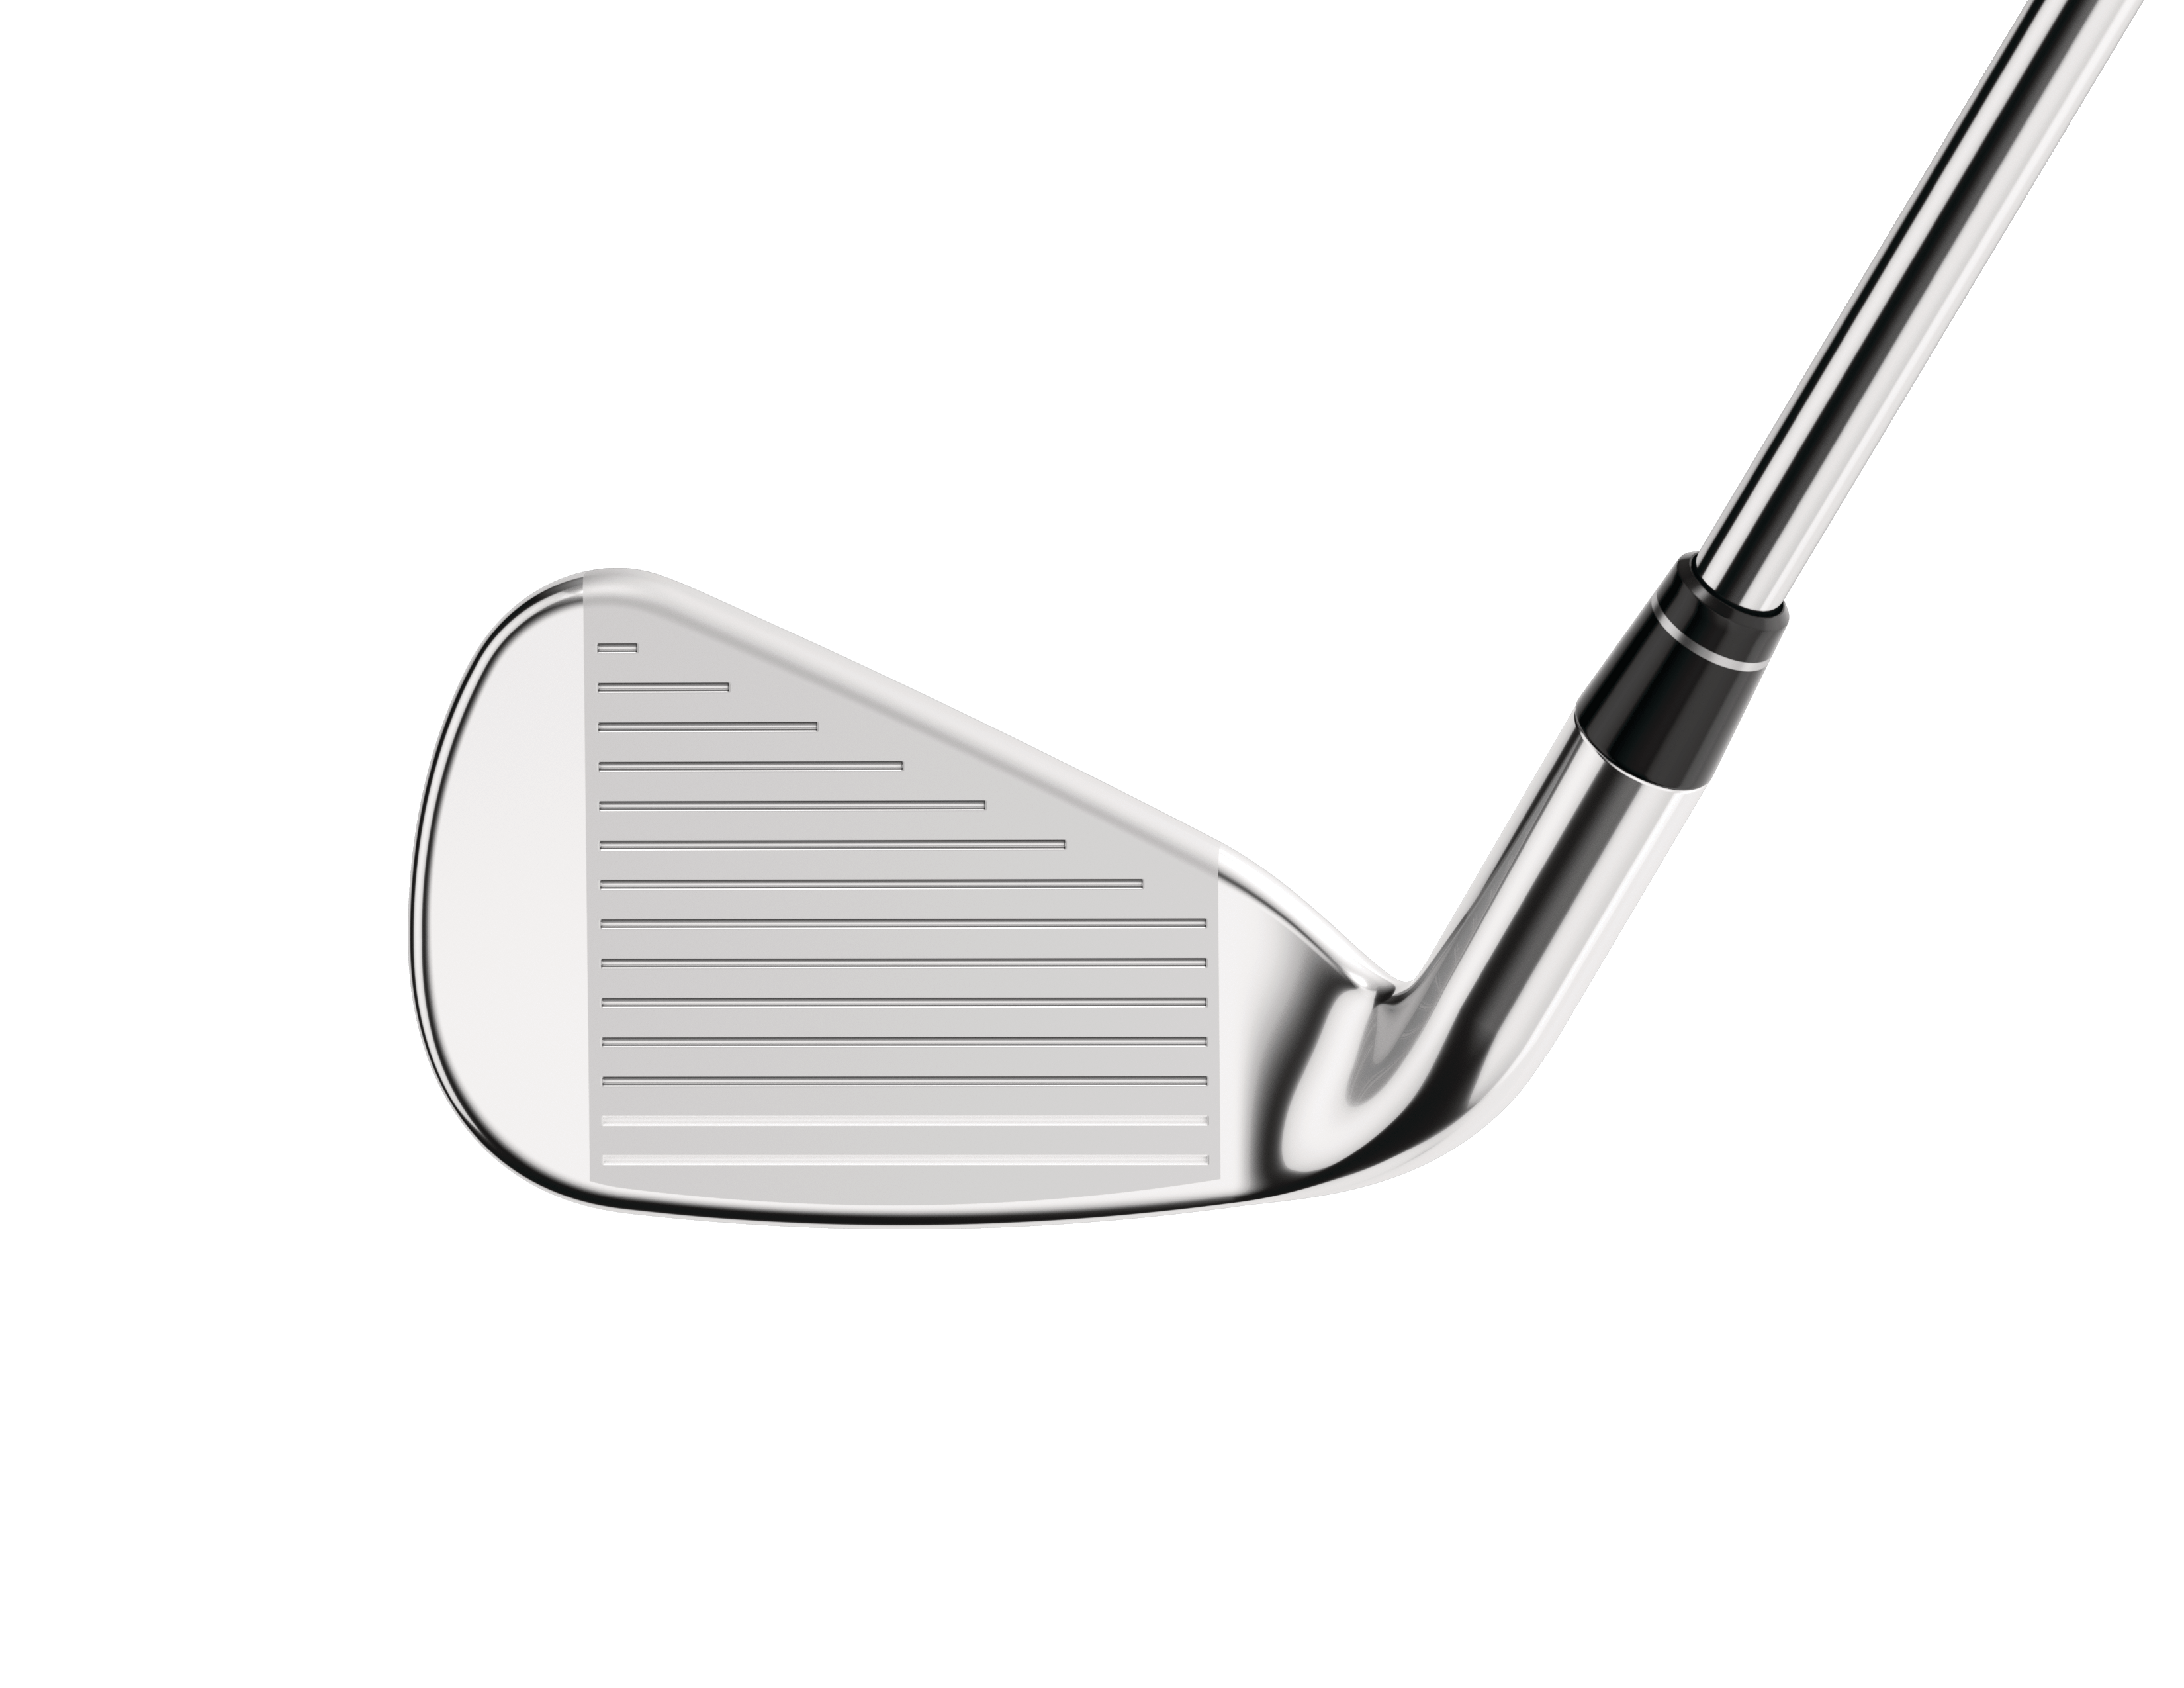 Callaway Rogue ST Max Irons · Left handed · Steel · Stiff · 5-PW,AW